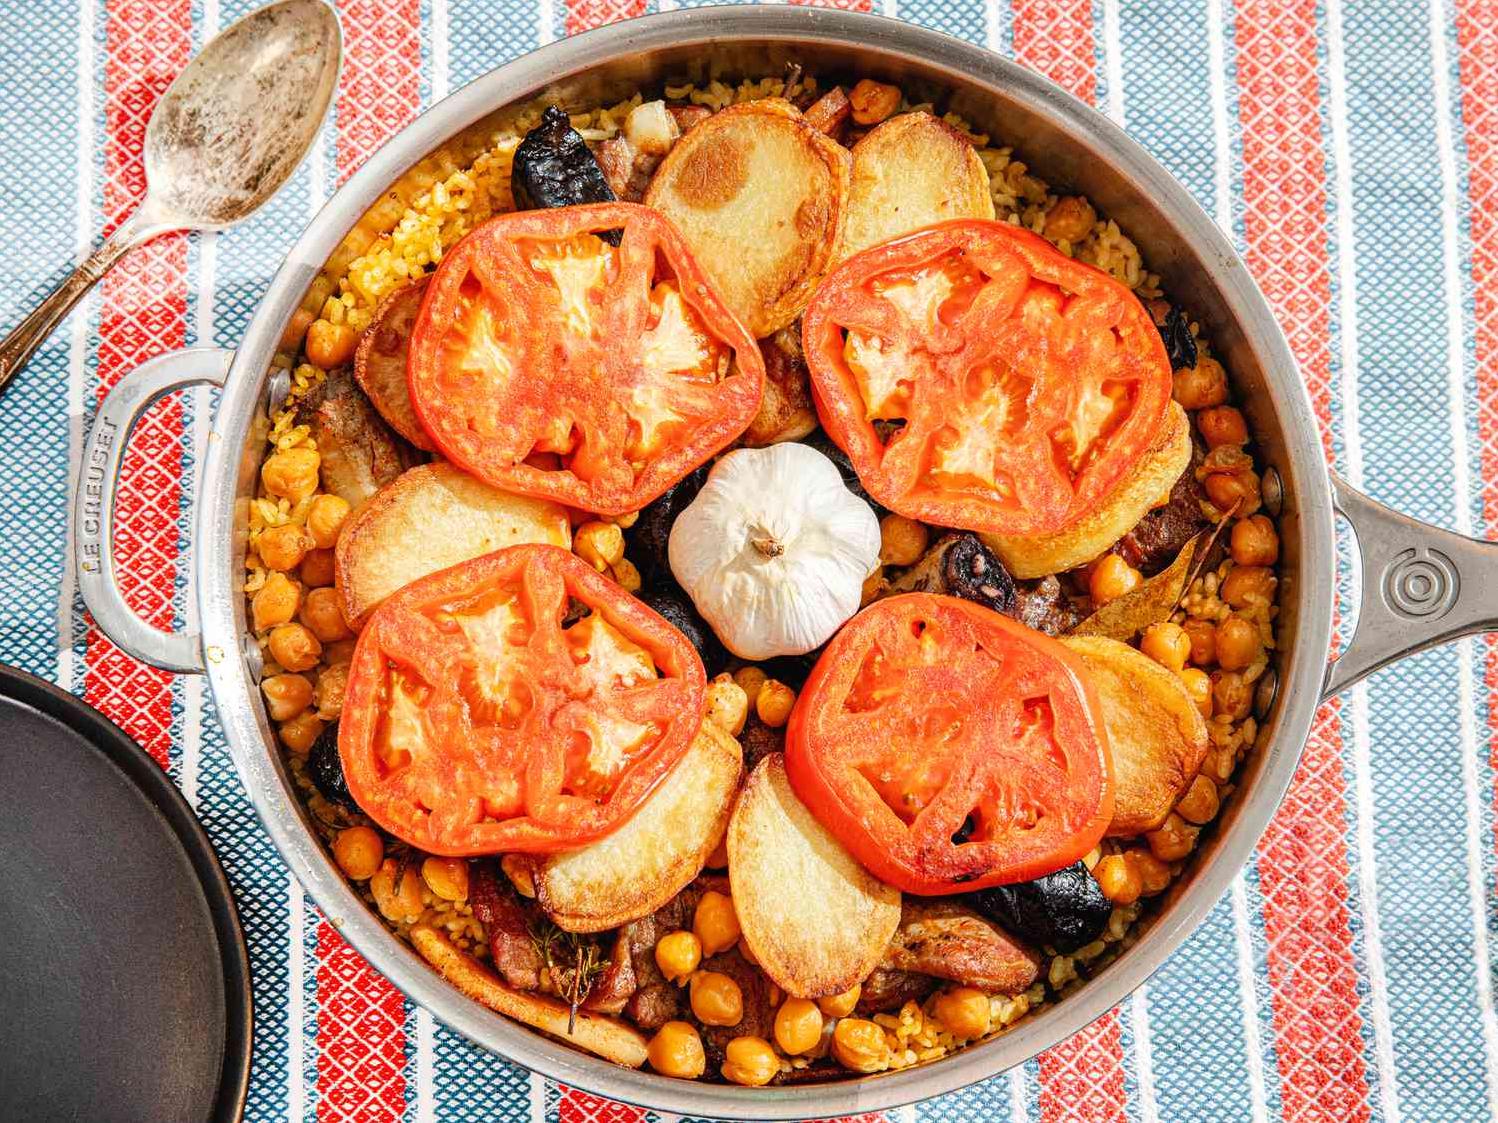  Say hello to your new favorite side dish - Arroz Al Horno!